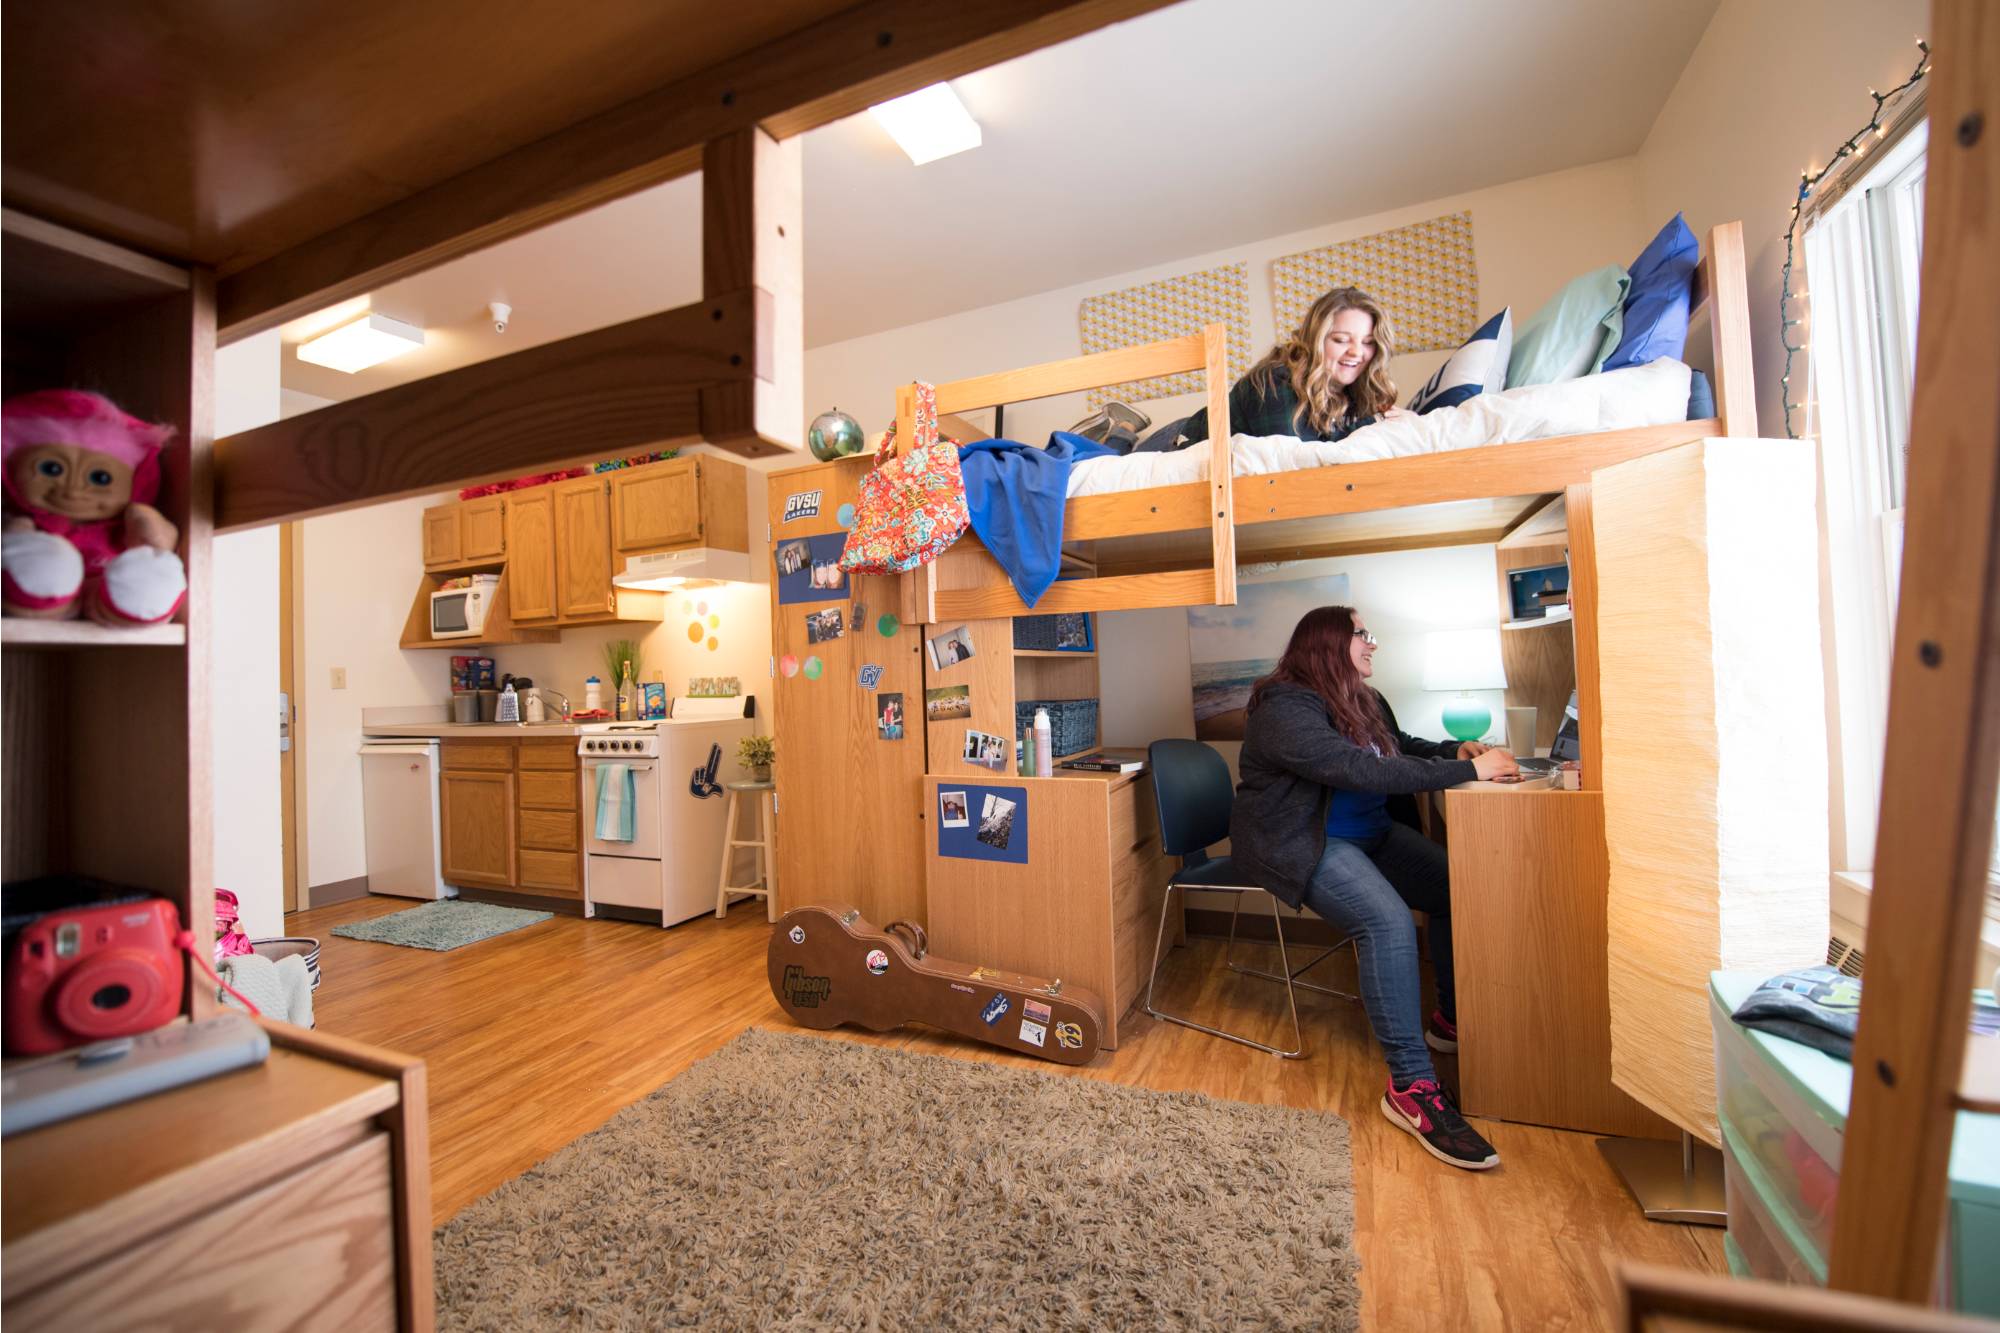 Students in a one bedroom apartment style room